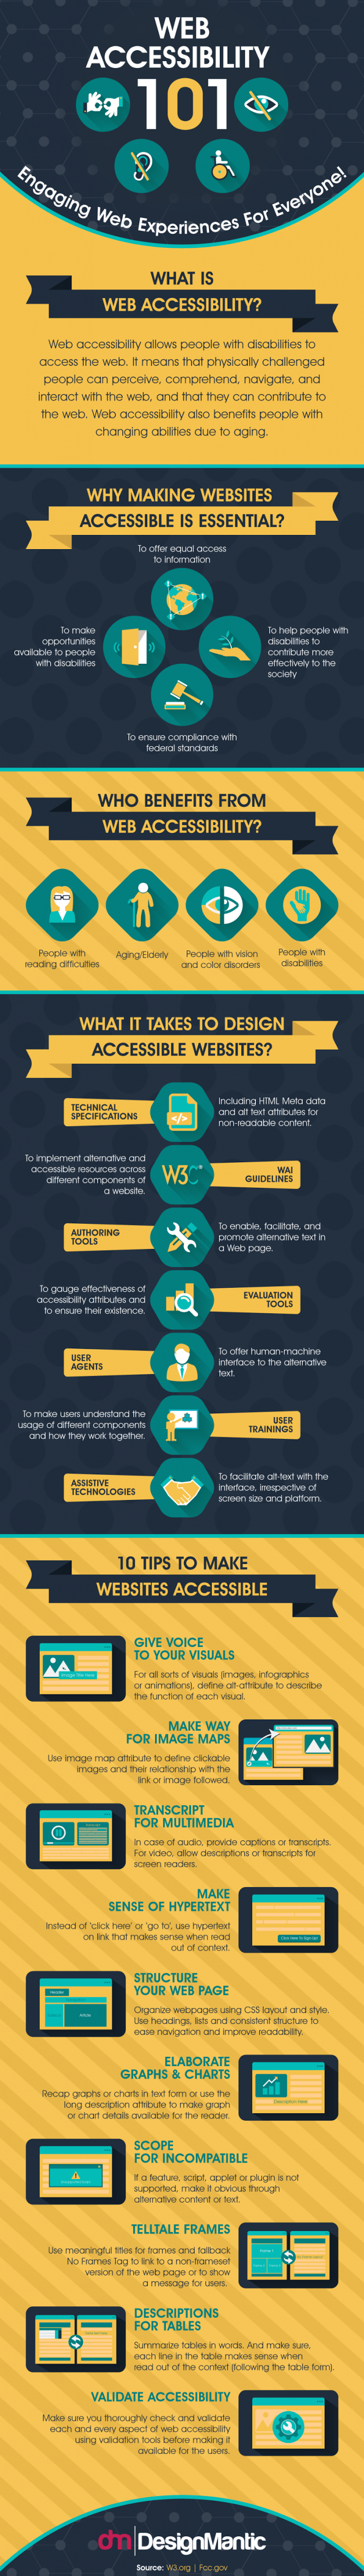 Web Accessibility 101 – Engaging Web Experiences For Everyone! - #infographic